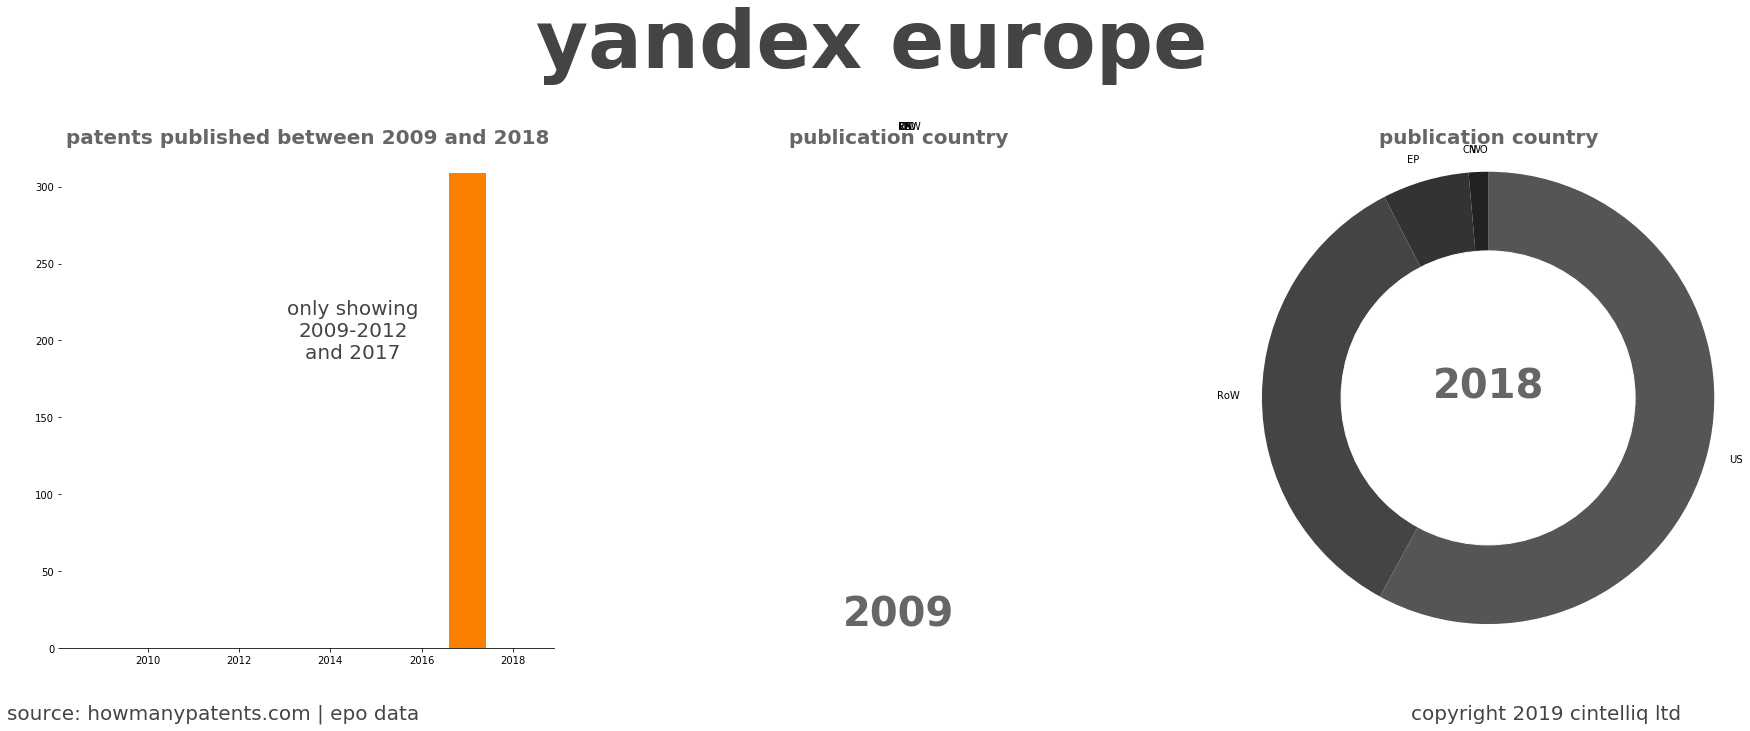 summary of patents for Yandex Europe